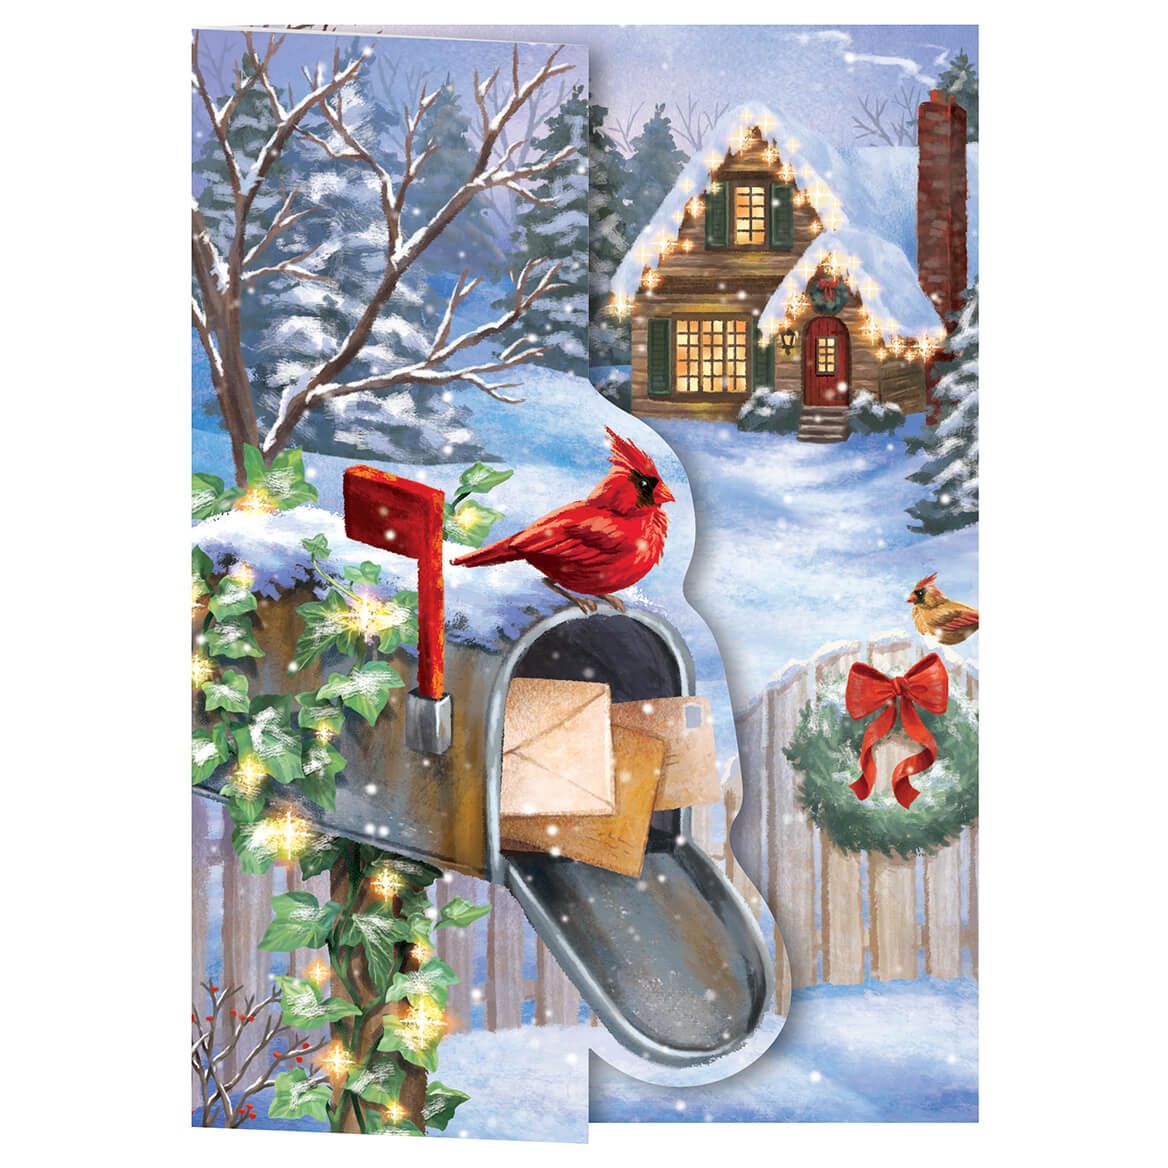 Personalized Cardinal With Glowing Cottage Christmas Cards, Set of 20 + '-' + 374967